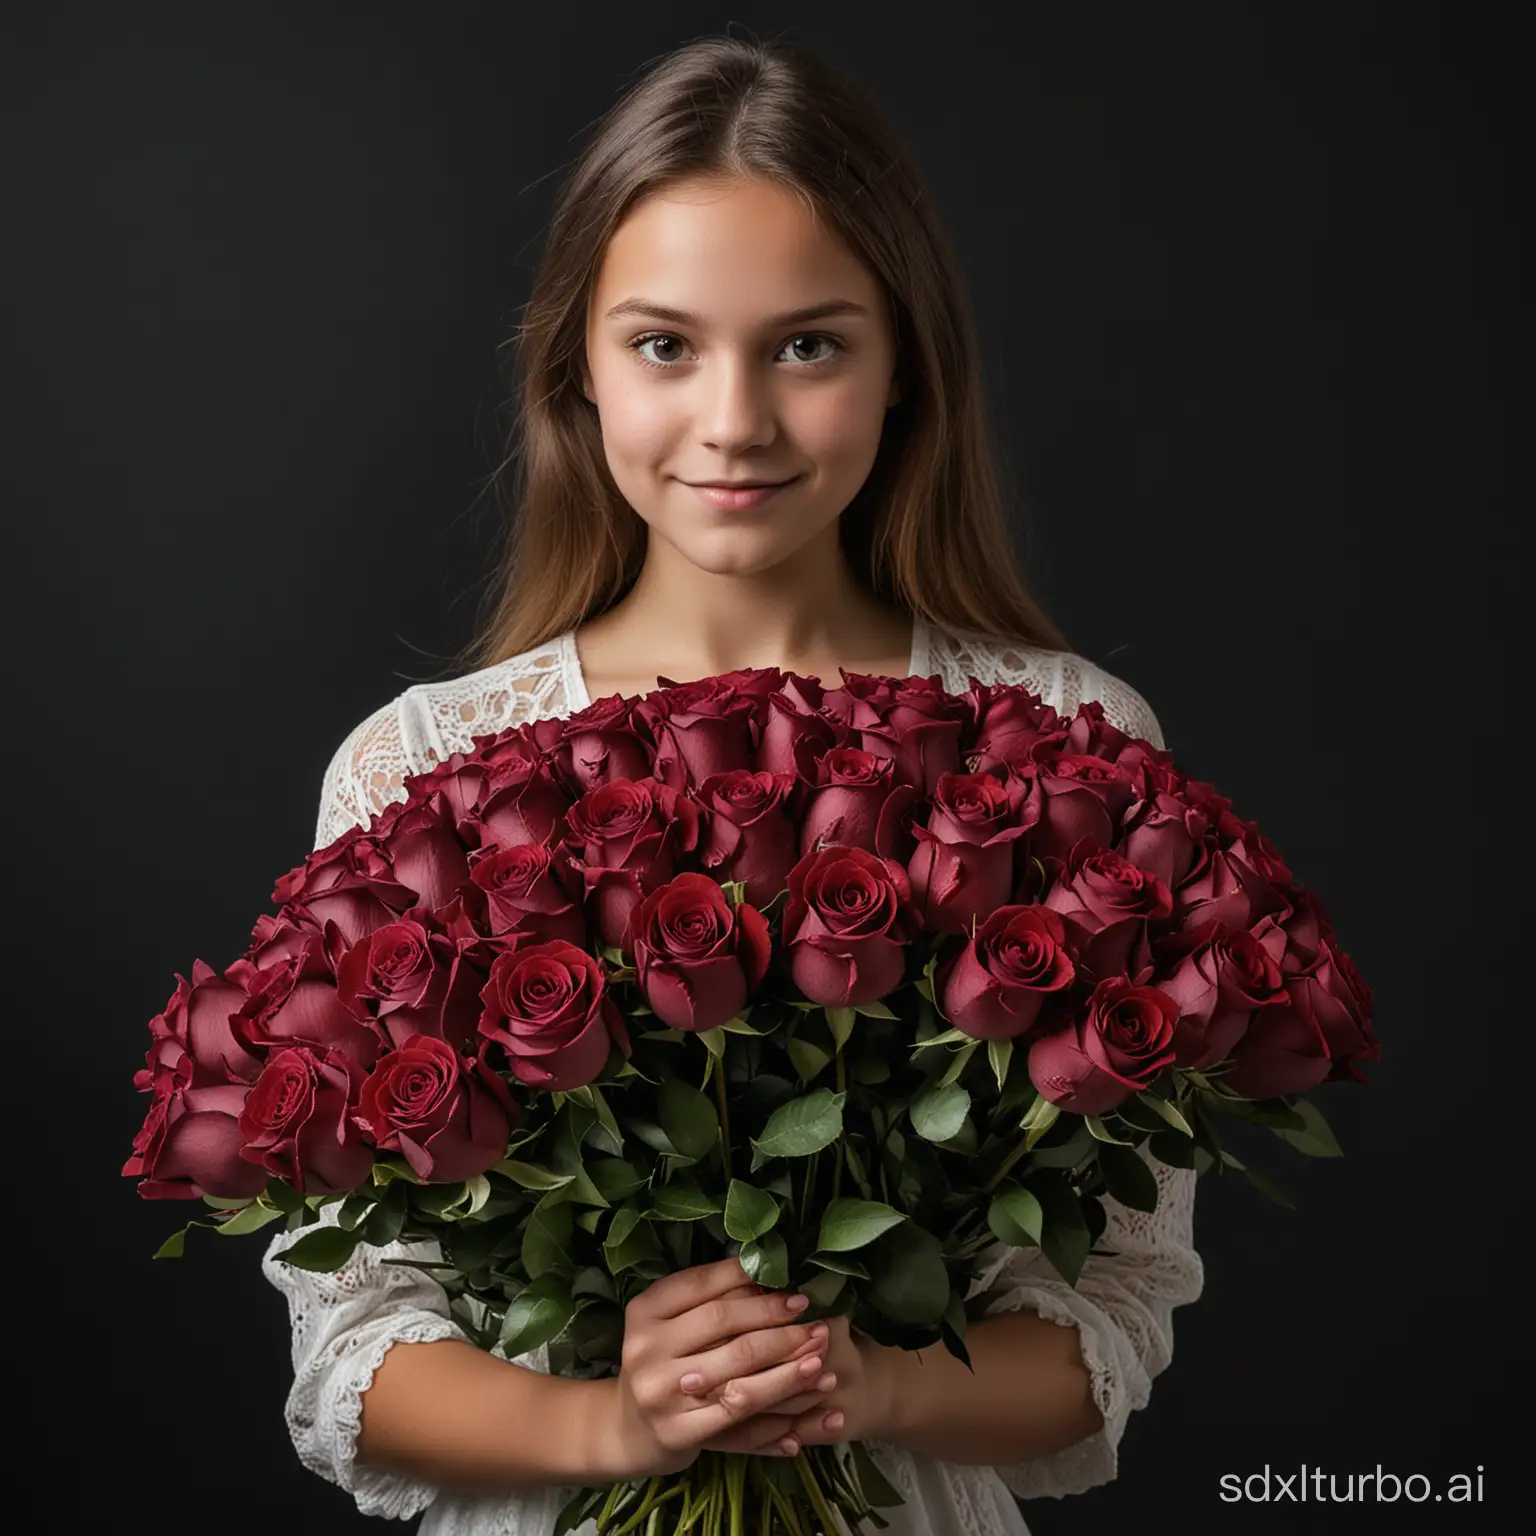 The girl holds 101 burgundy roses of the Madame Red variety in her hands. Behind the girl is a monochrome black background. The girl is in semi-darkness behind. But the bright evenly diffused light falls evenly on the girl herself and on the bouquet of roses. The girl is about 35 years old.